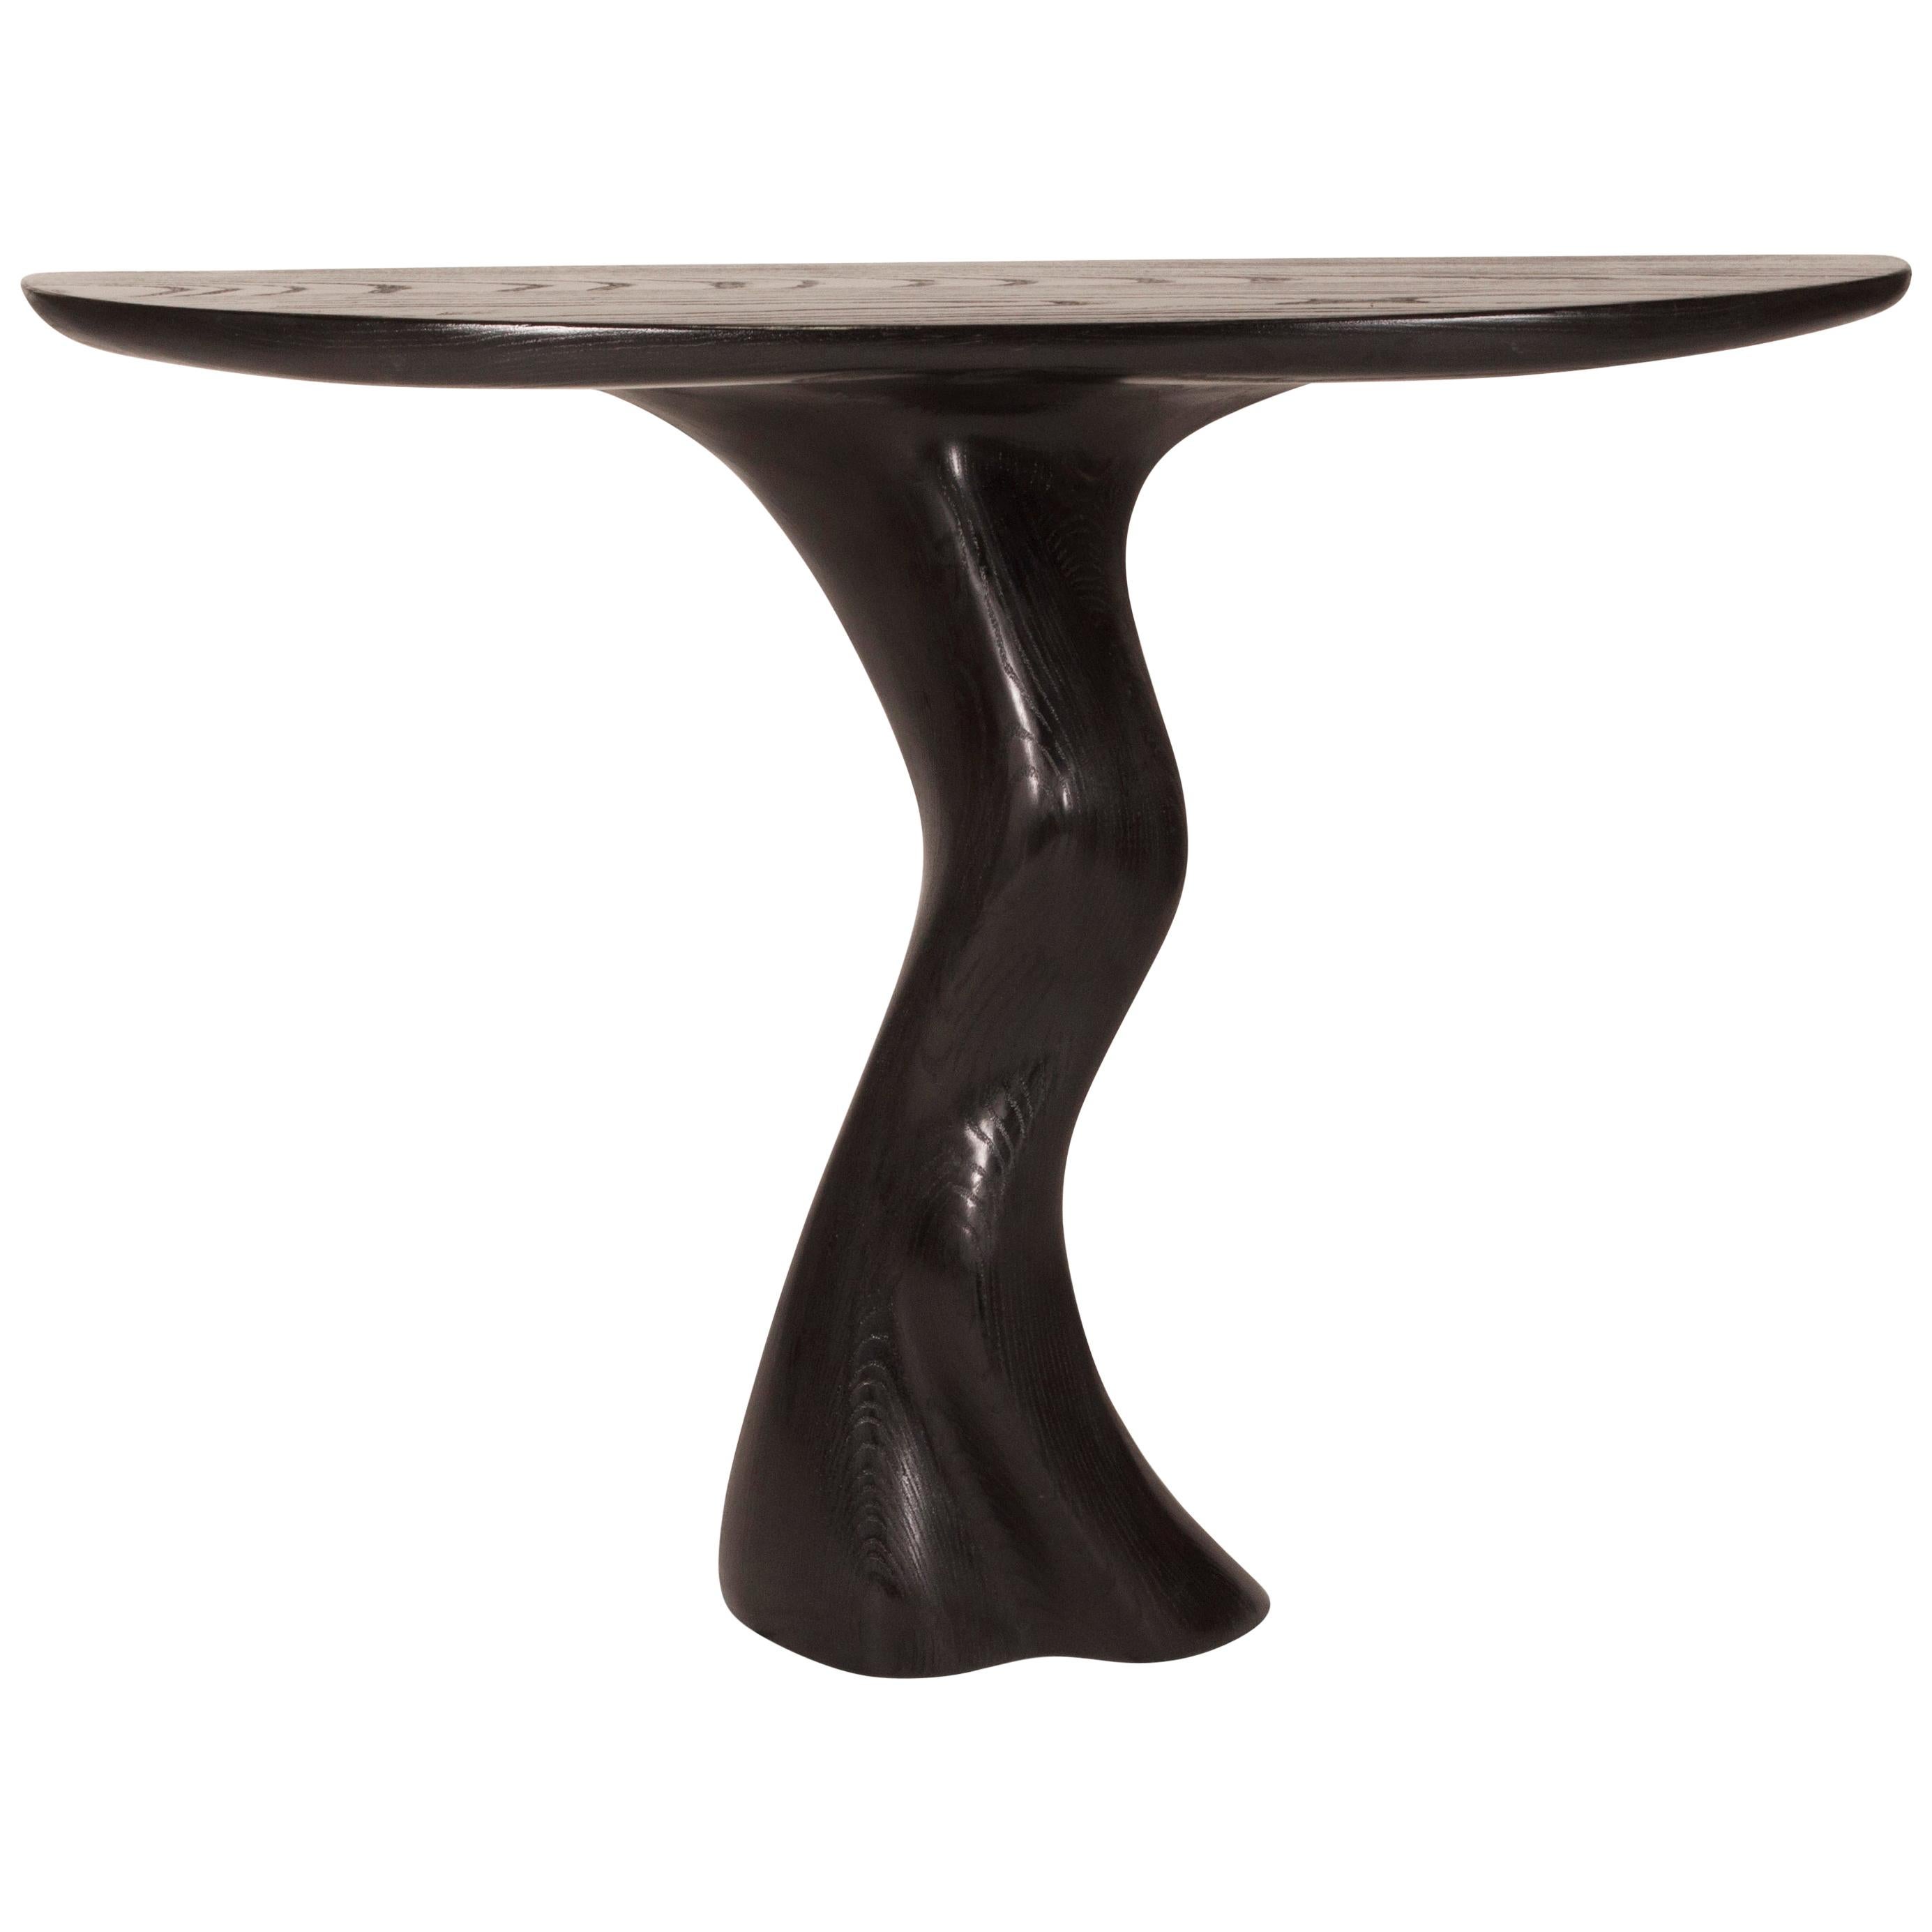 Haya Console Table, Solid Wood, Ebony Stained, Wall Mounted